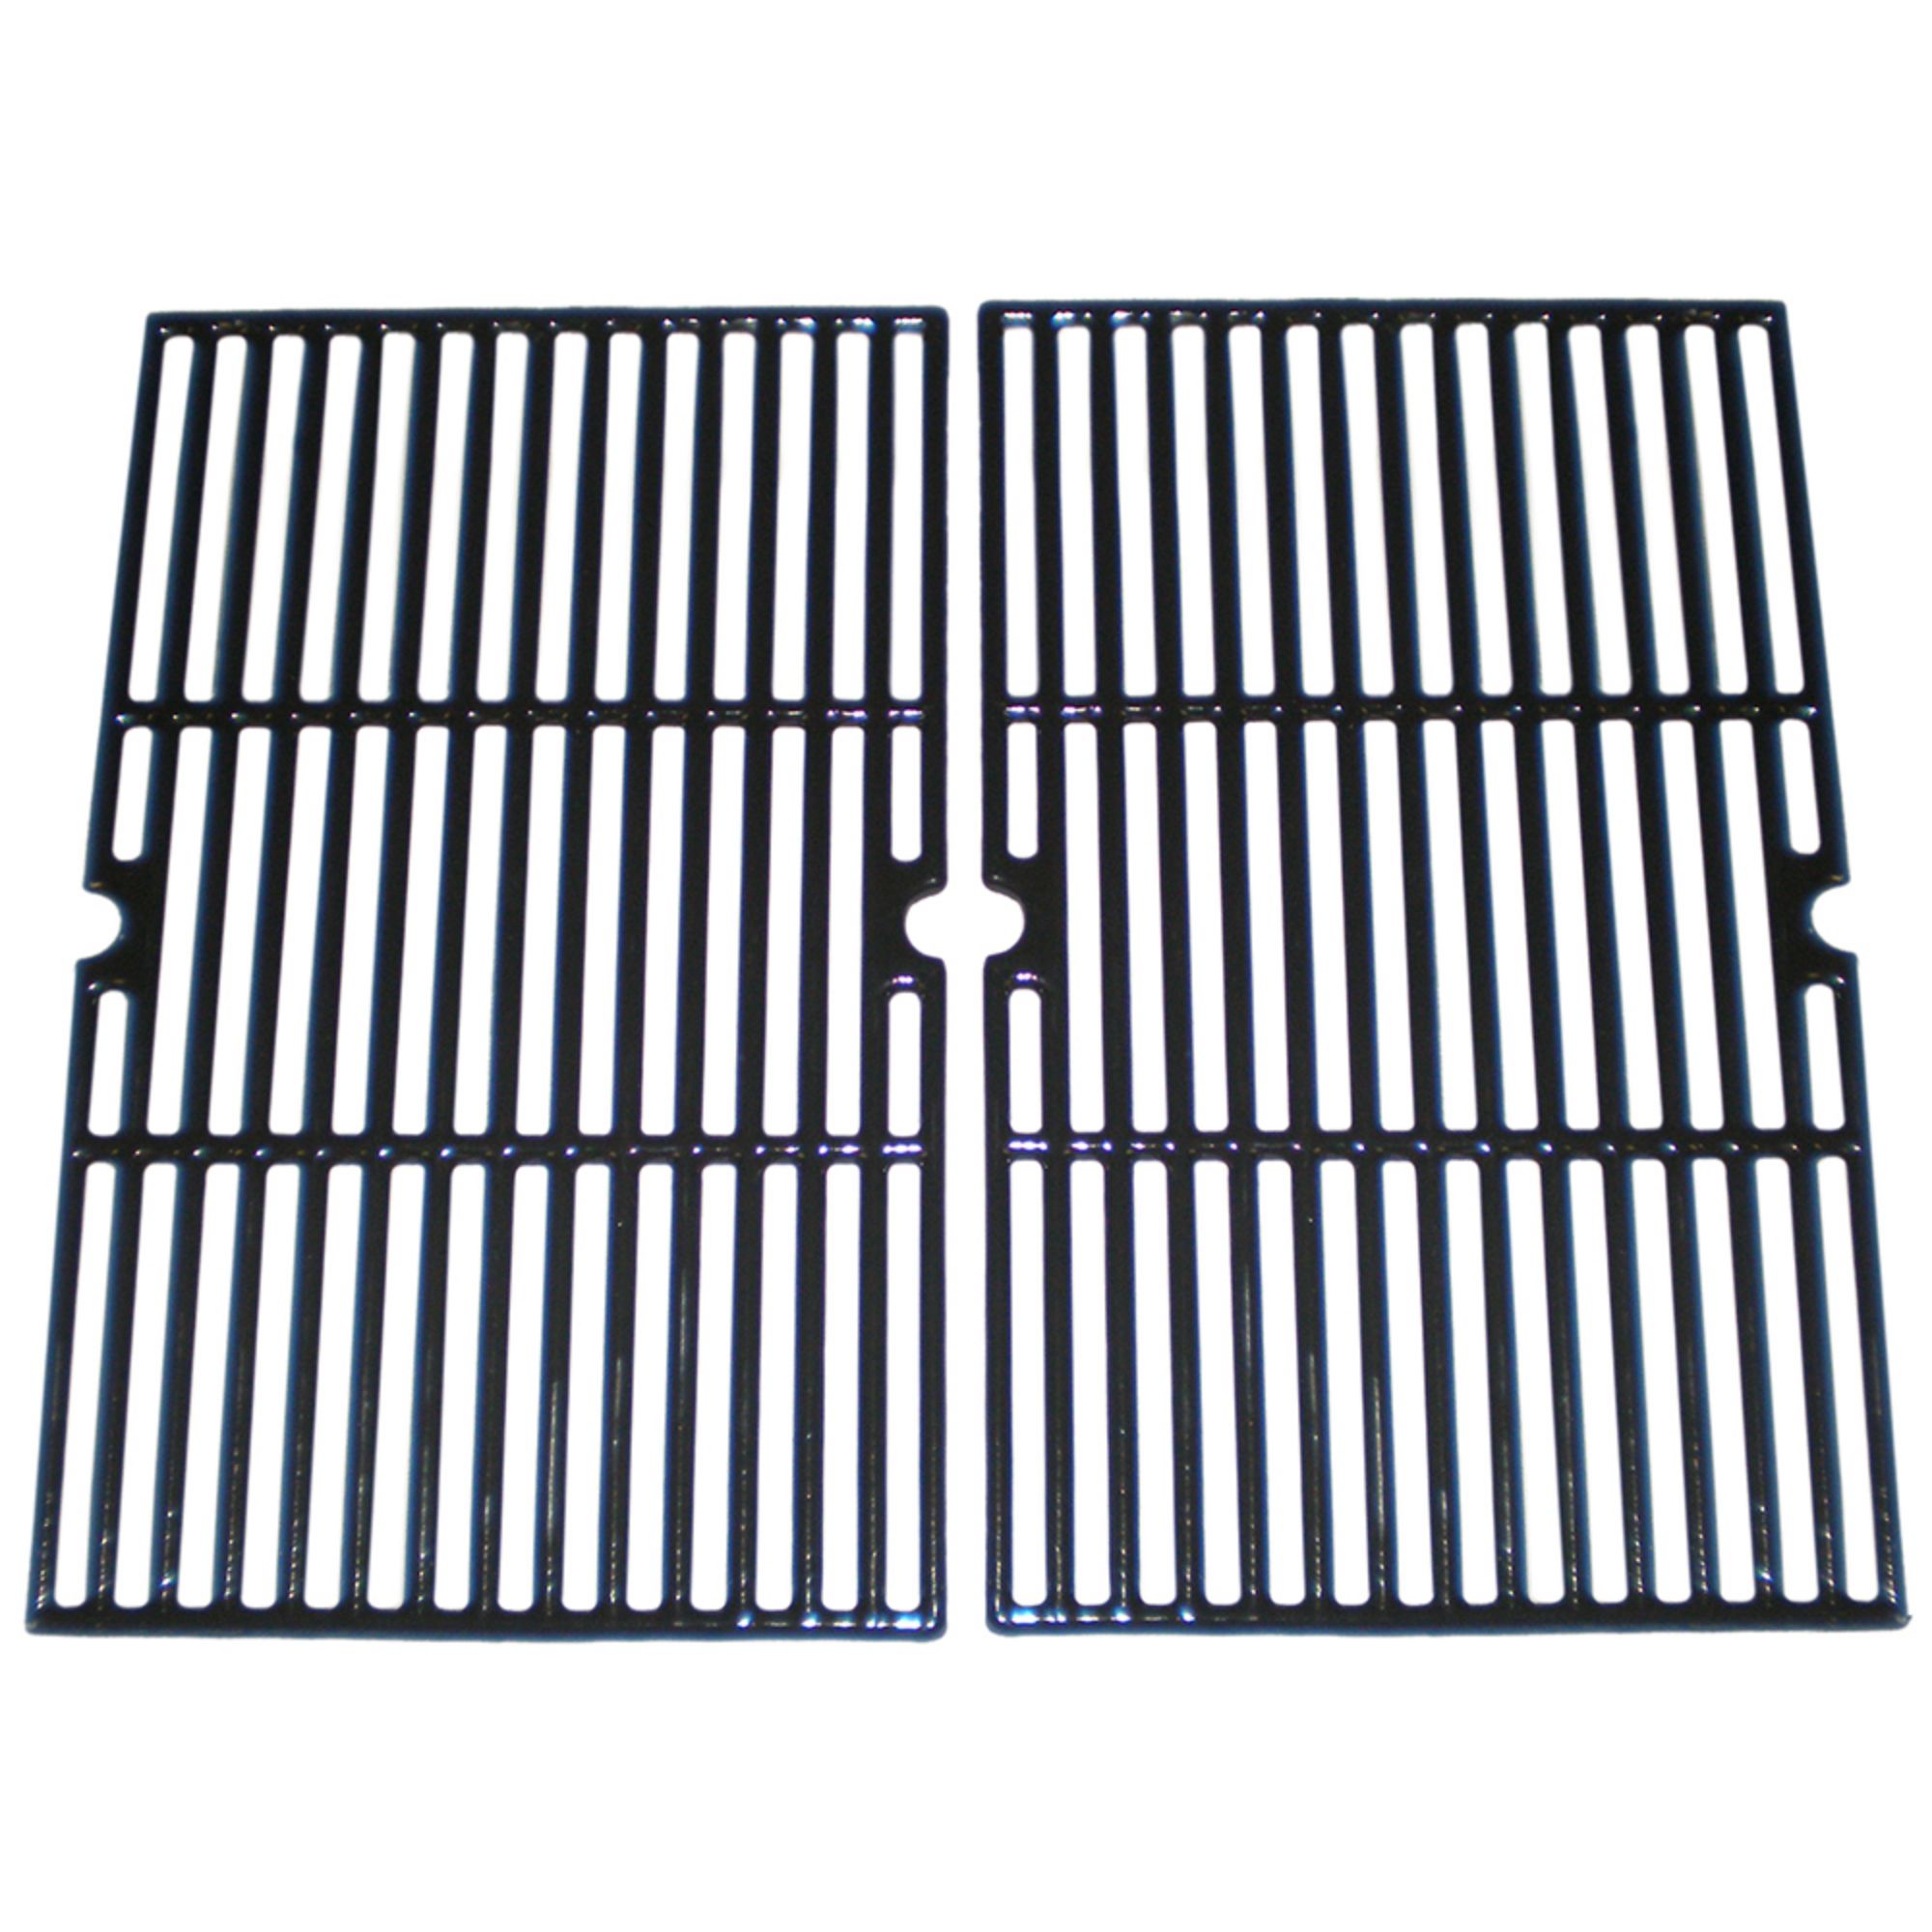 Gloss cast iron cooking grid for BBQ Tek, Broil Chef, Presidents Choice brand gas grills